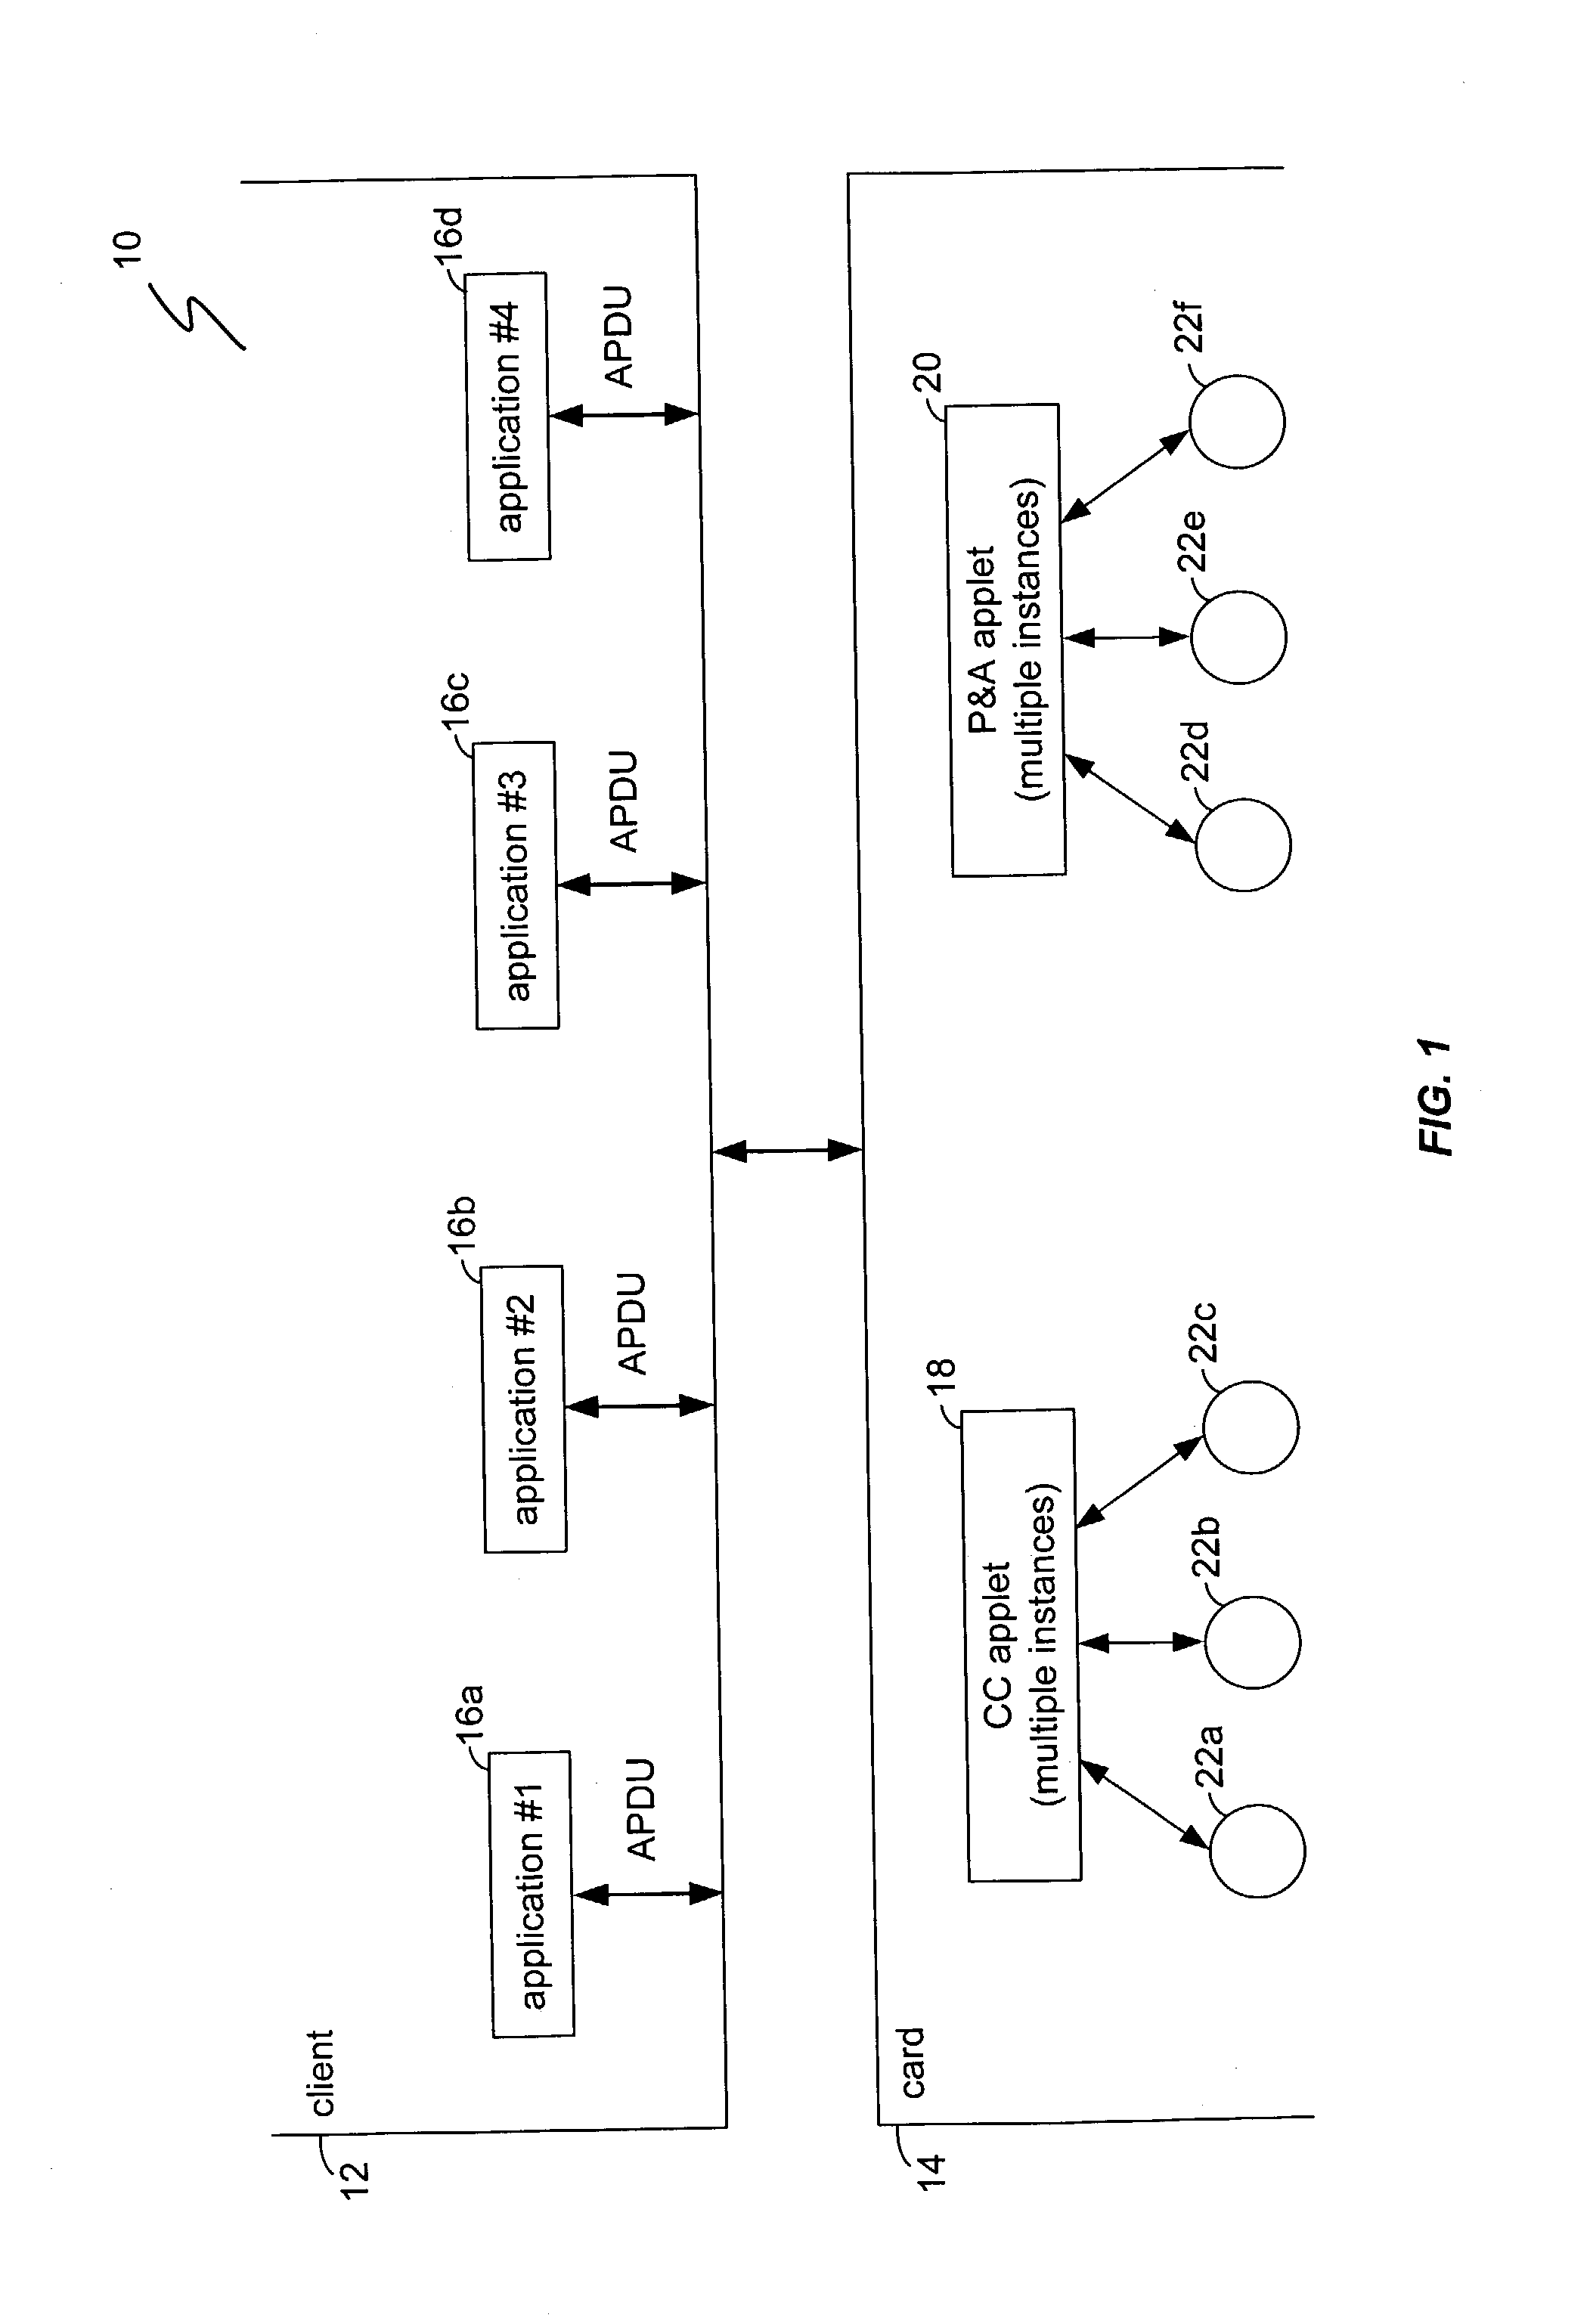 Method and system for facilitating memory and application management on a secured token